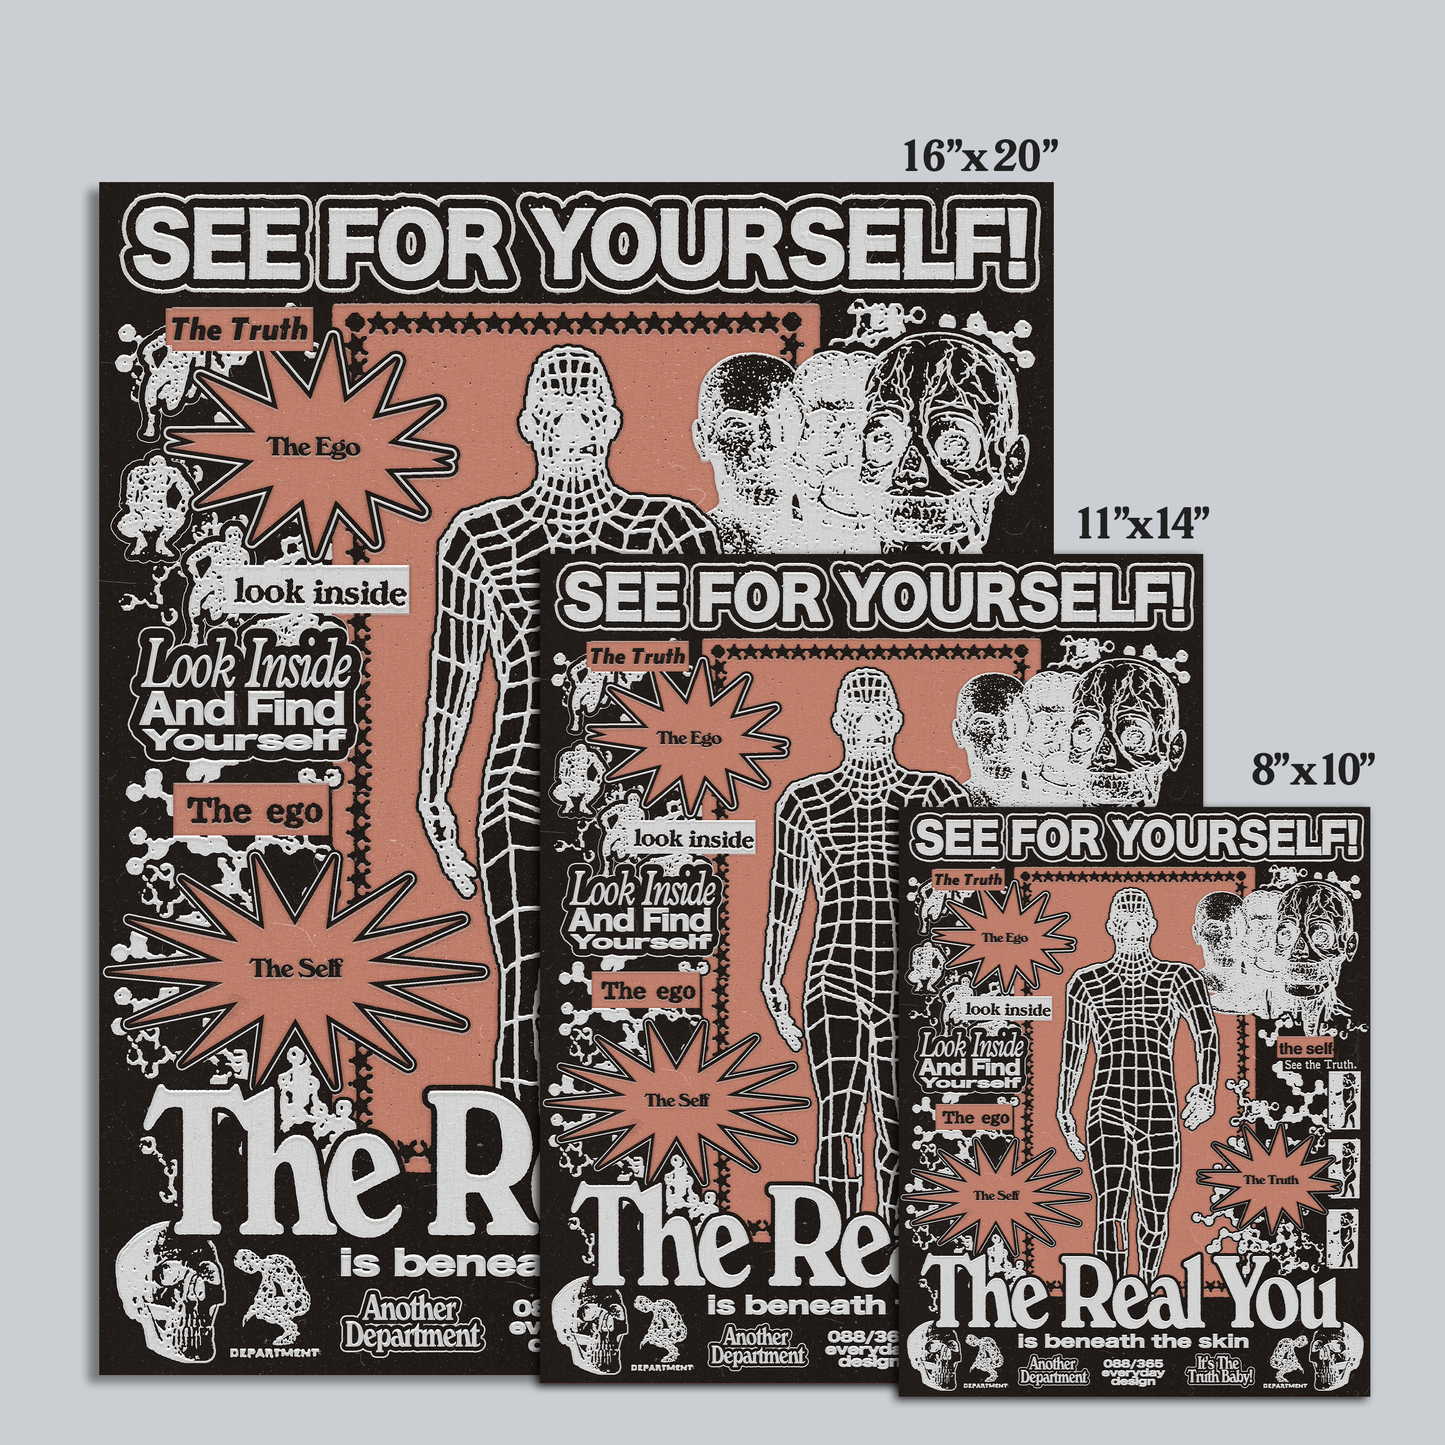 088 - The Real You